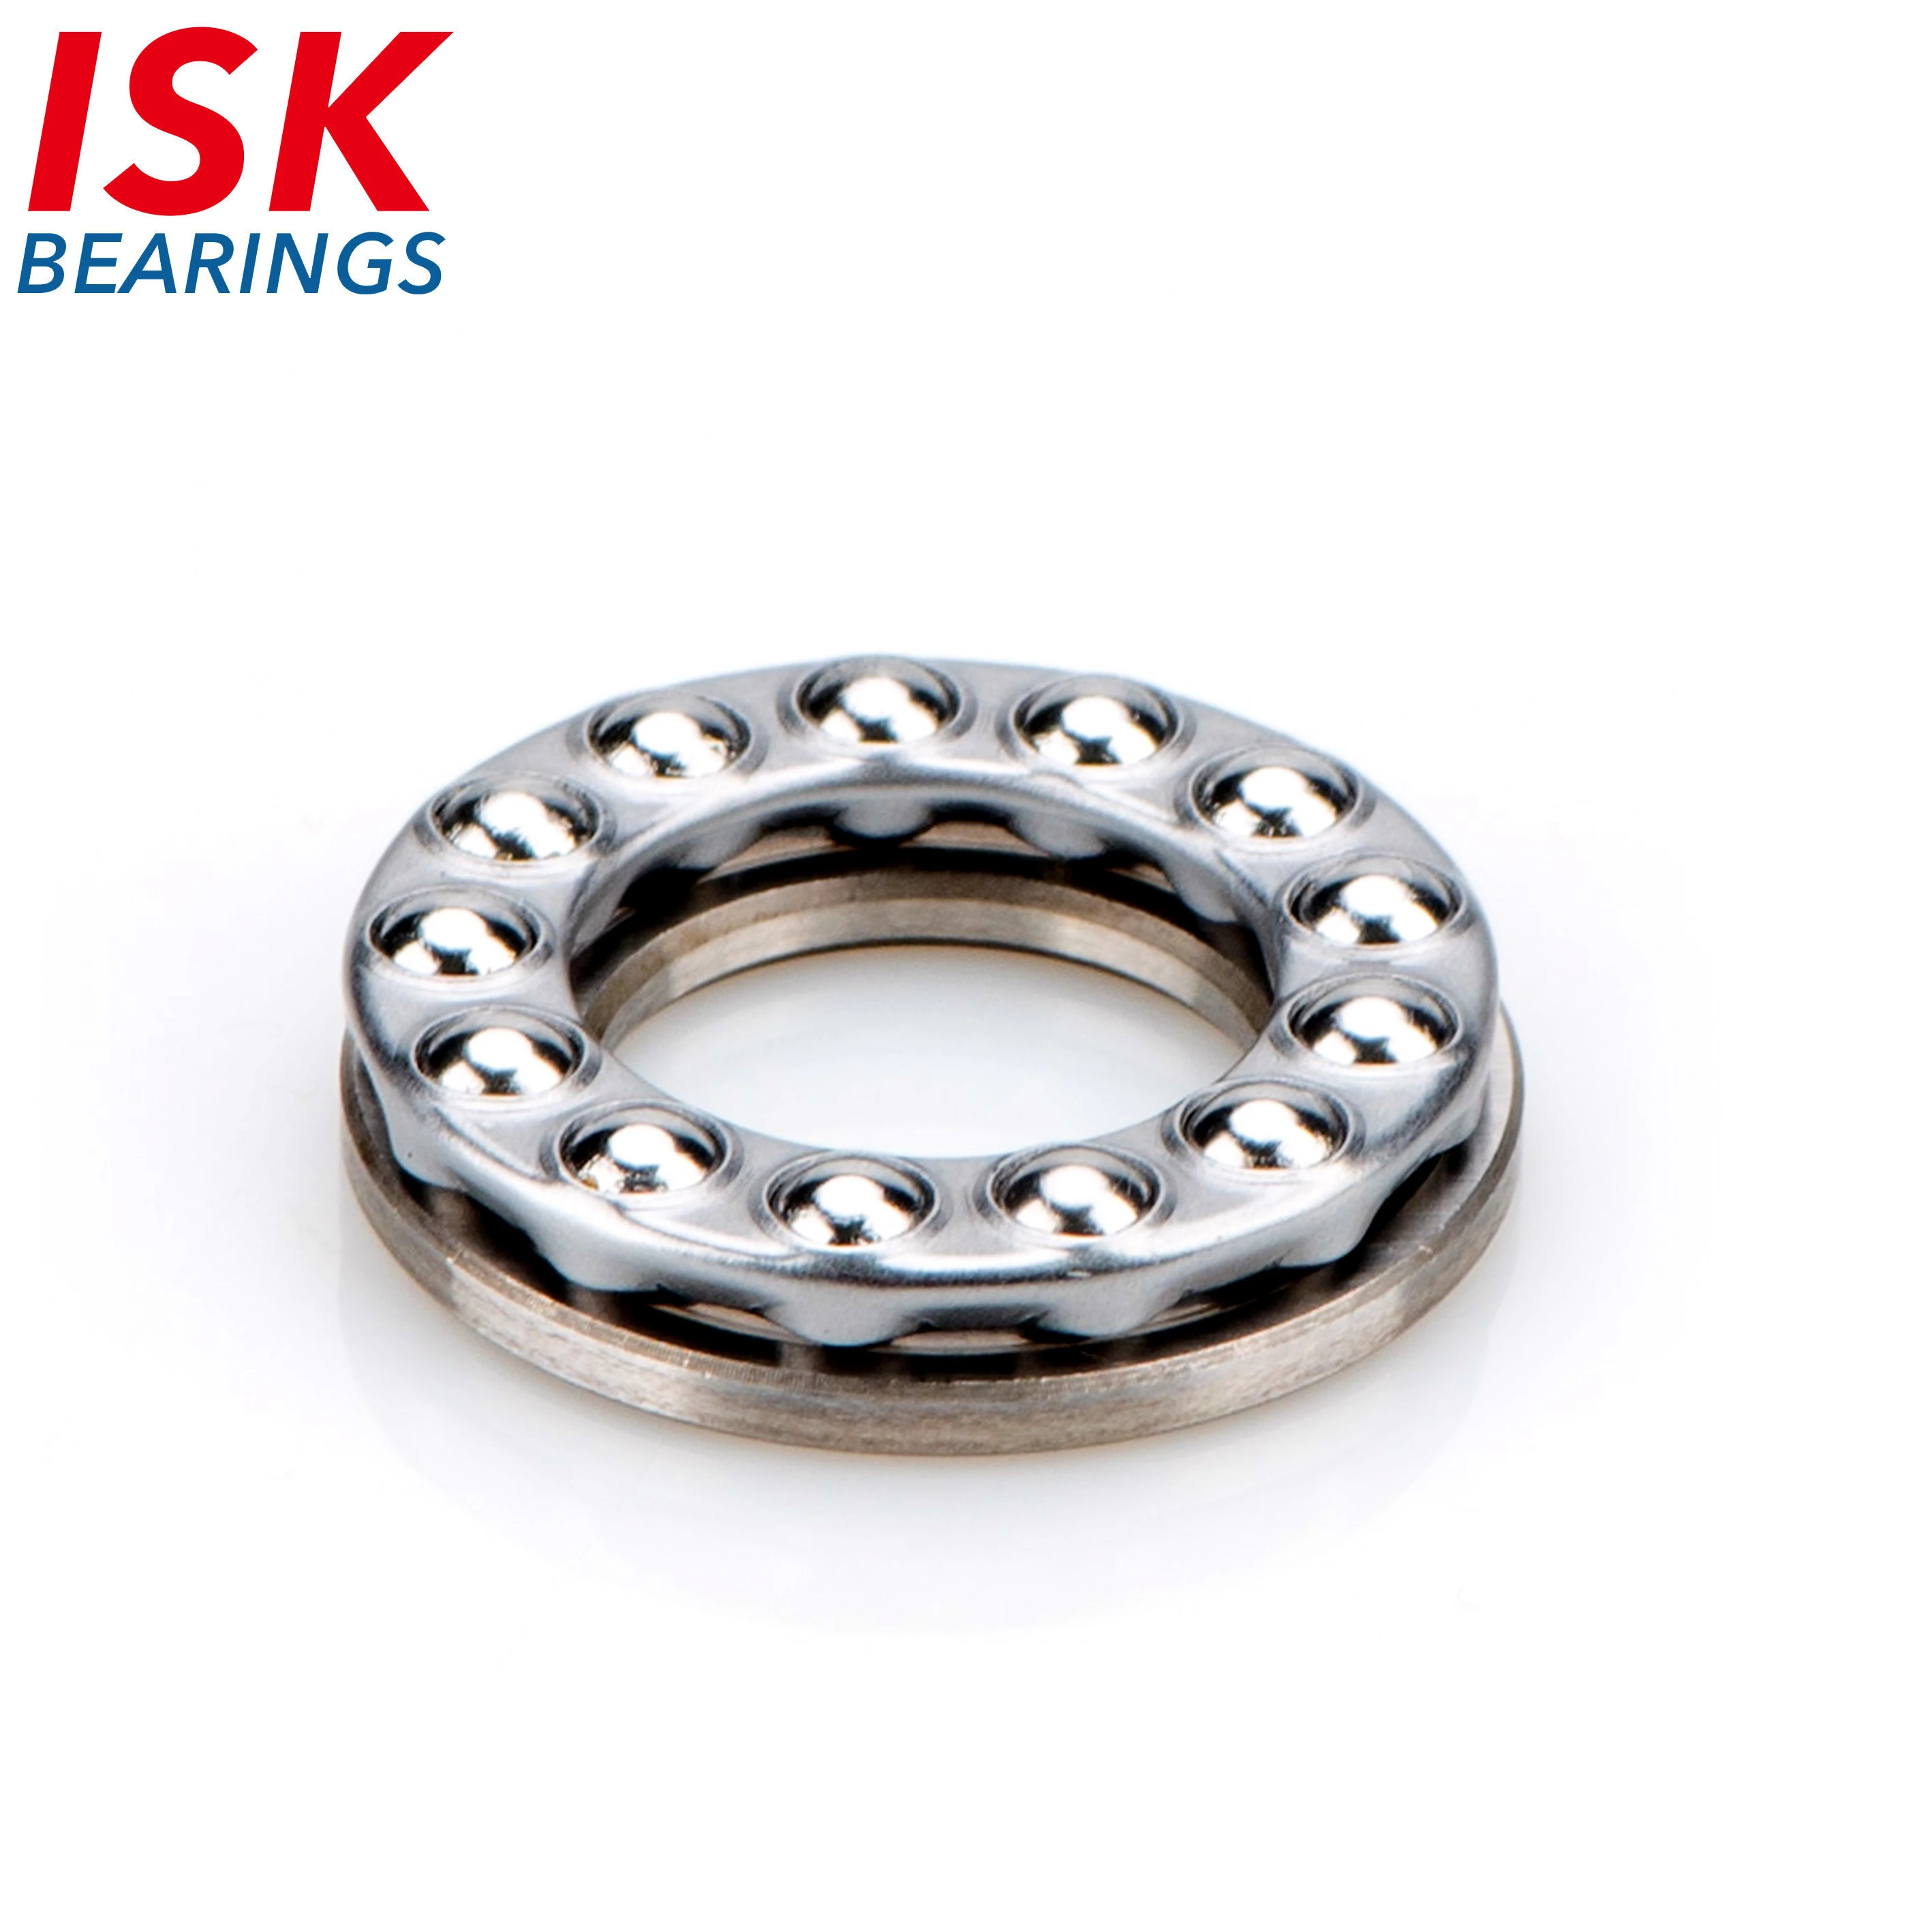 Axial bearing washers Thrust needle roller bearing series